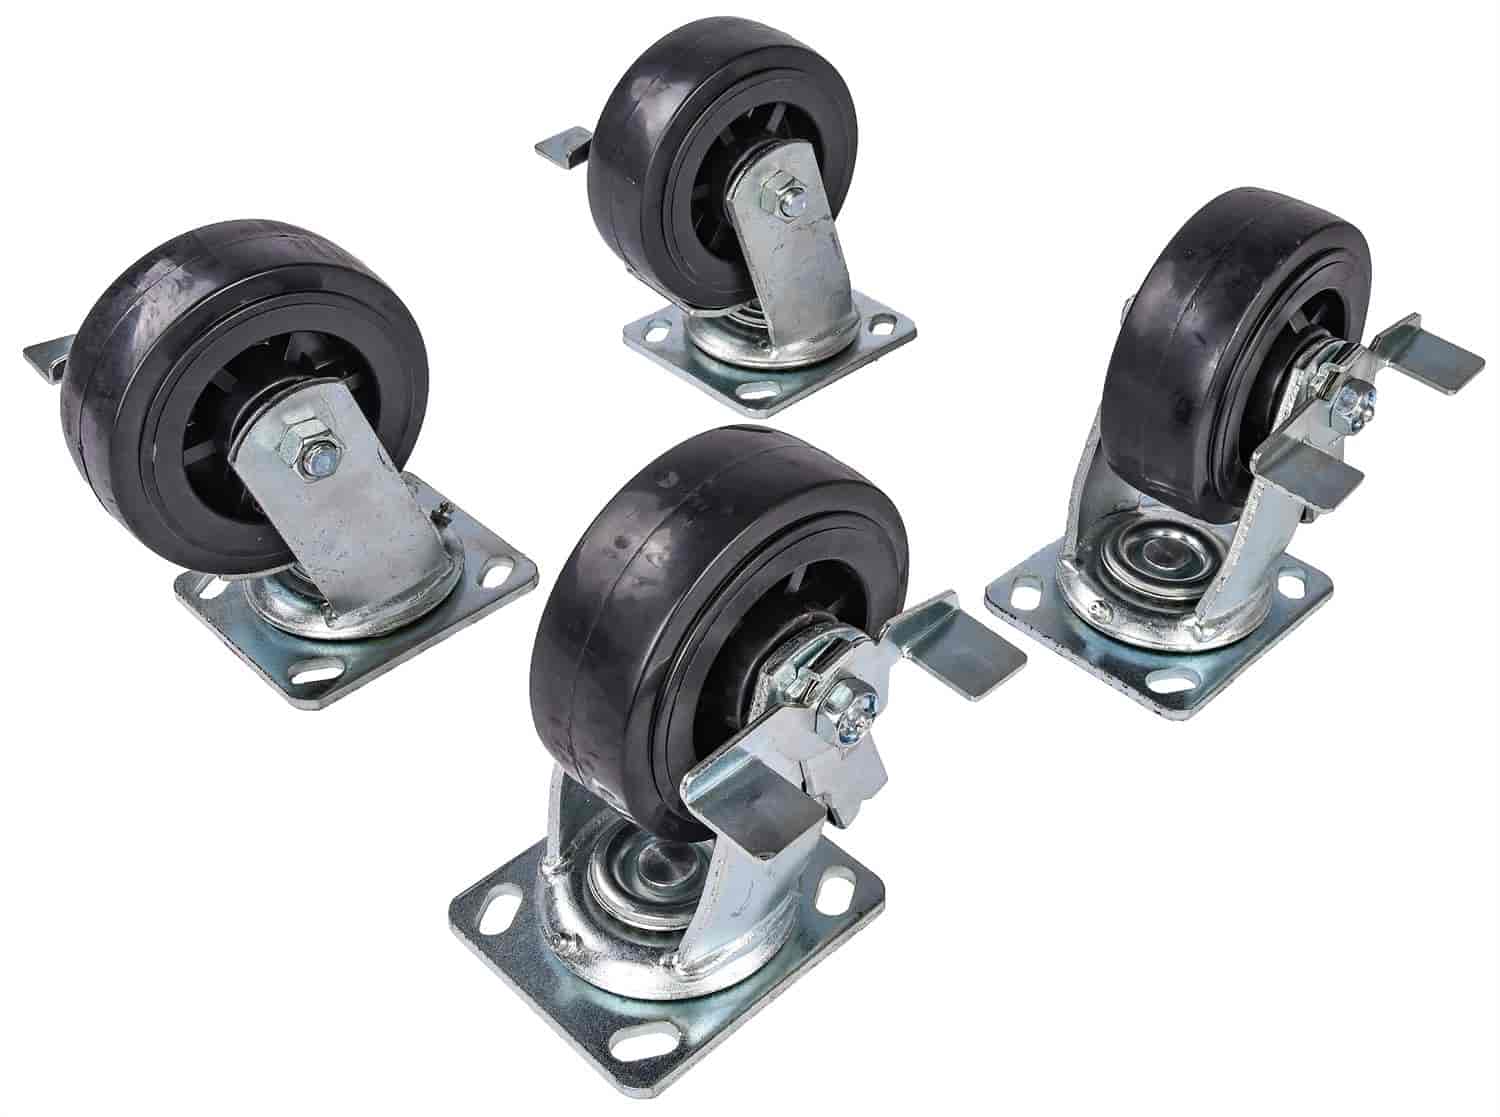 Replacement Swivel Caster Wheels Fits JEGS Adjustable Height Gantry Crane 1-Ton (555-81245)